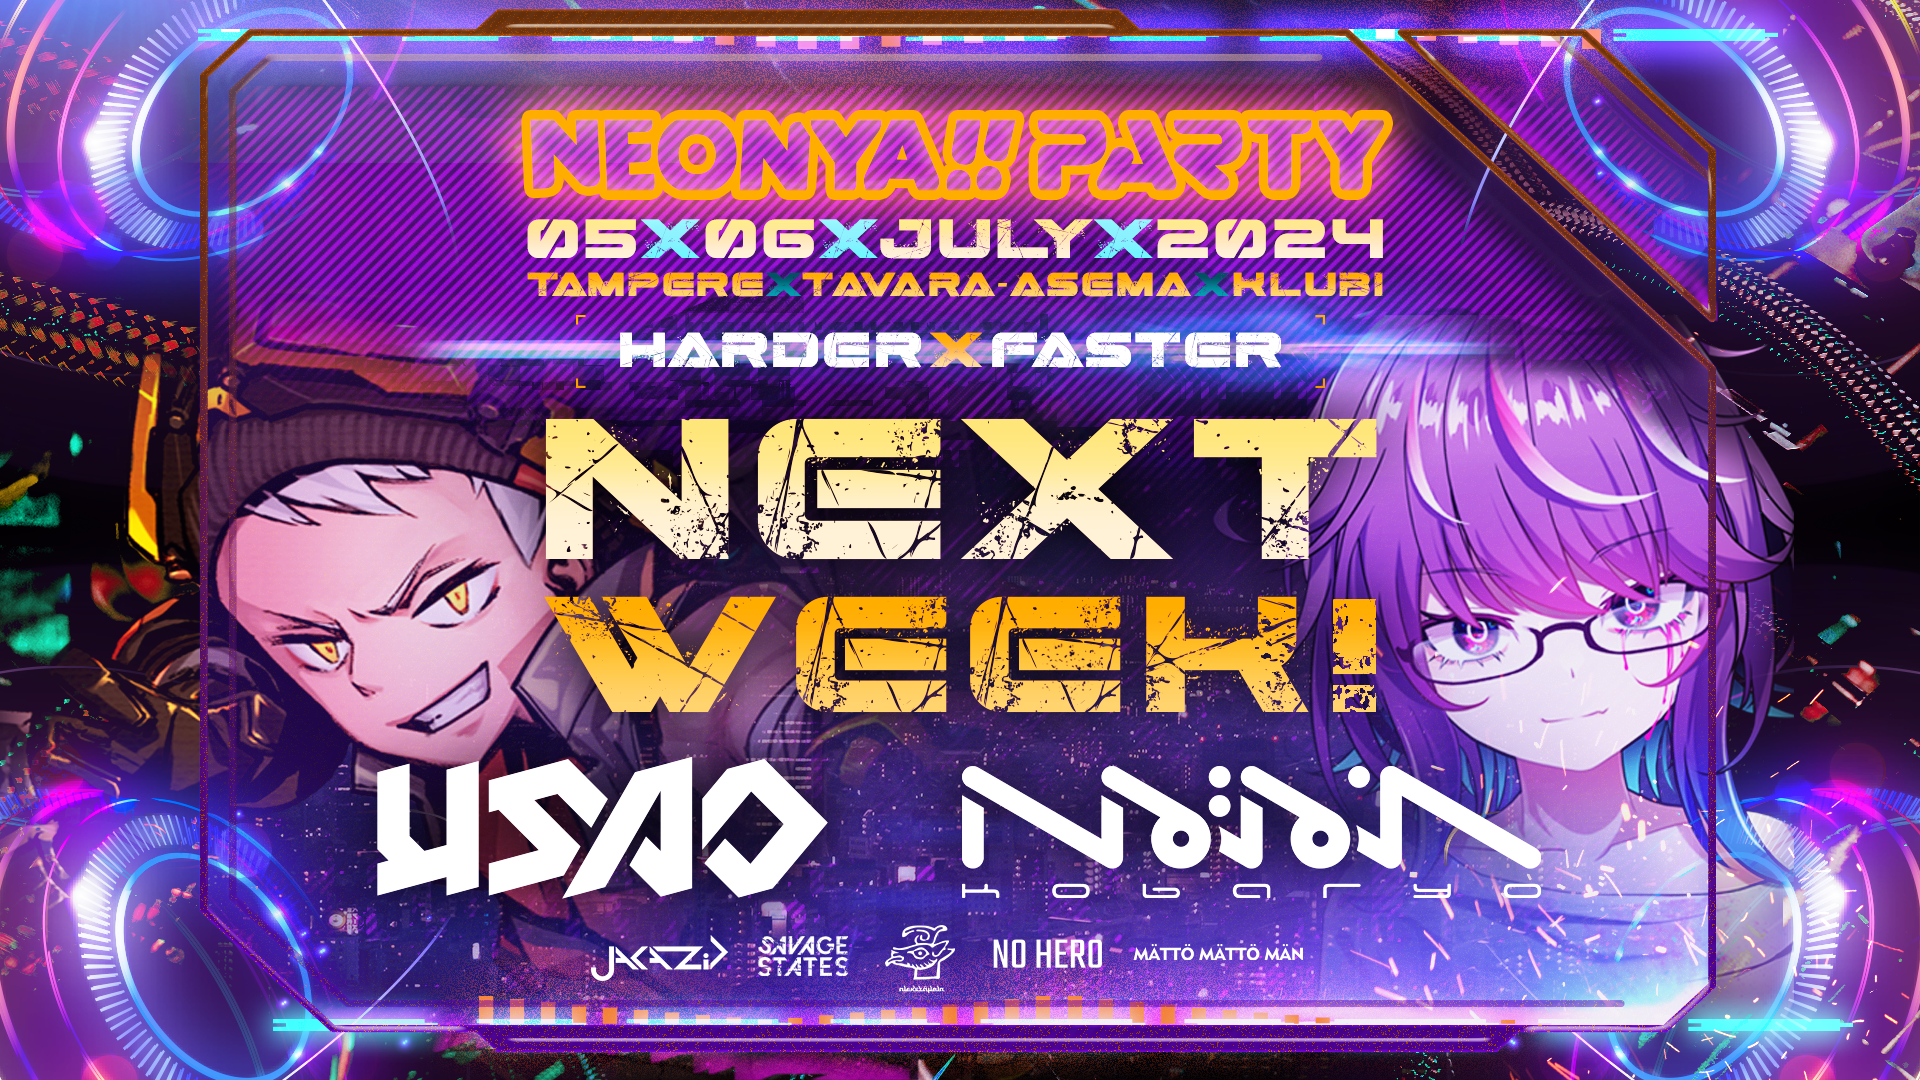 Only a week to go until HARDER X FASTER with USAO, Kobaryo & more!